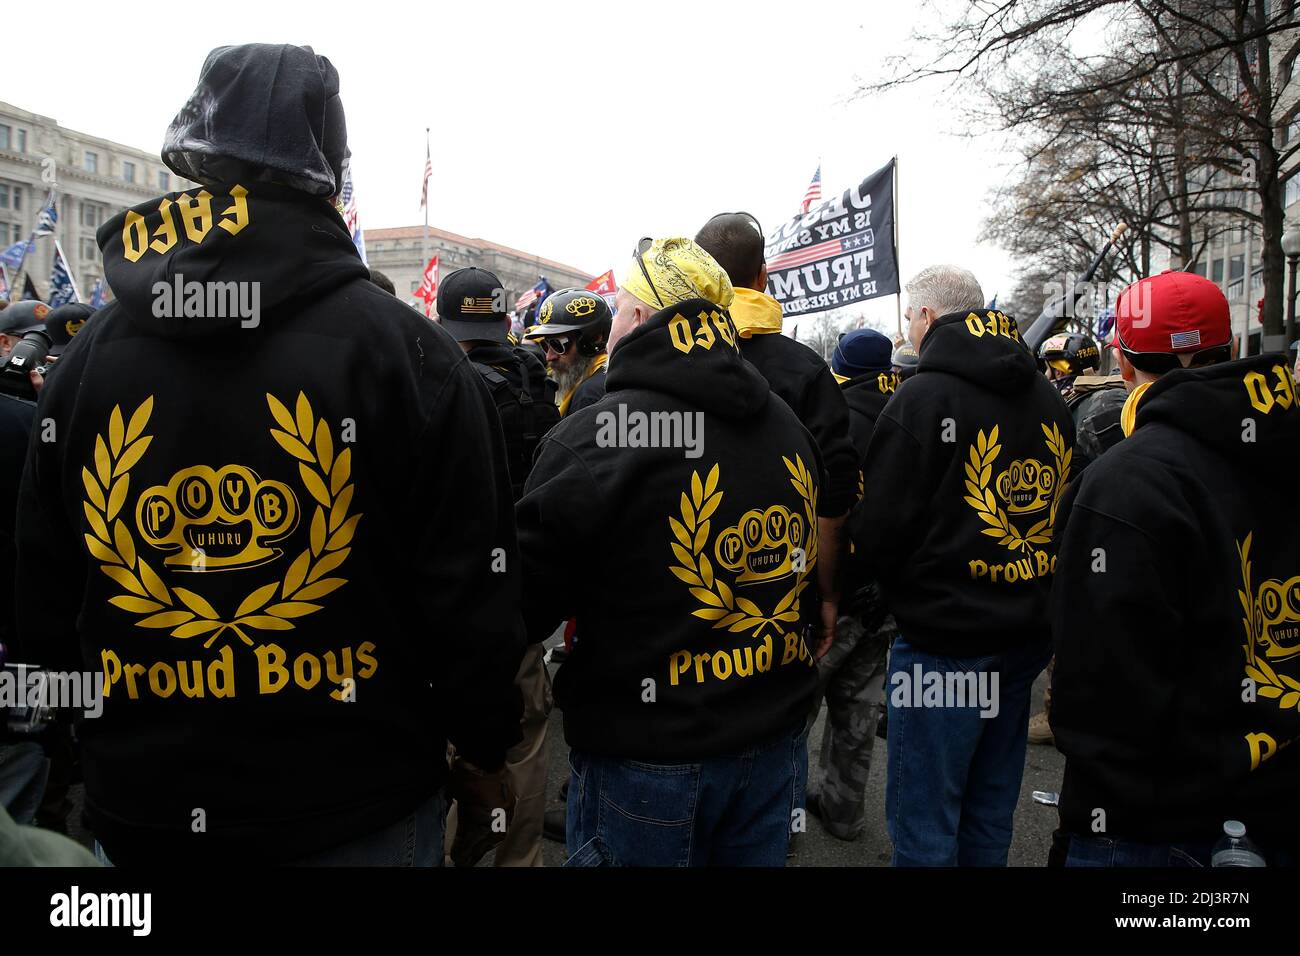 Proud Boys attend a rally in Freedom Plaza.Backers continue to support the President’s unproven claims of massive voter fraud and electoral irregularities. Following the November MAGA (Make America Great Again) rally in Washington, Women for America First, a conservative organization, has filed for another permit to rally in support of President Trump, just two days before the electors form each state are to vote for their candidate. Stock Photo